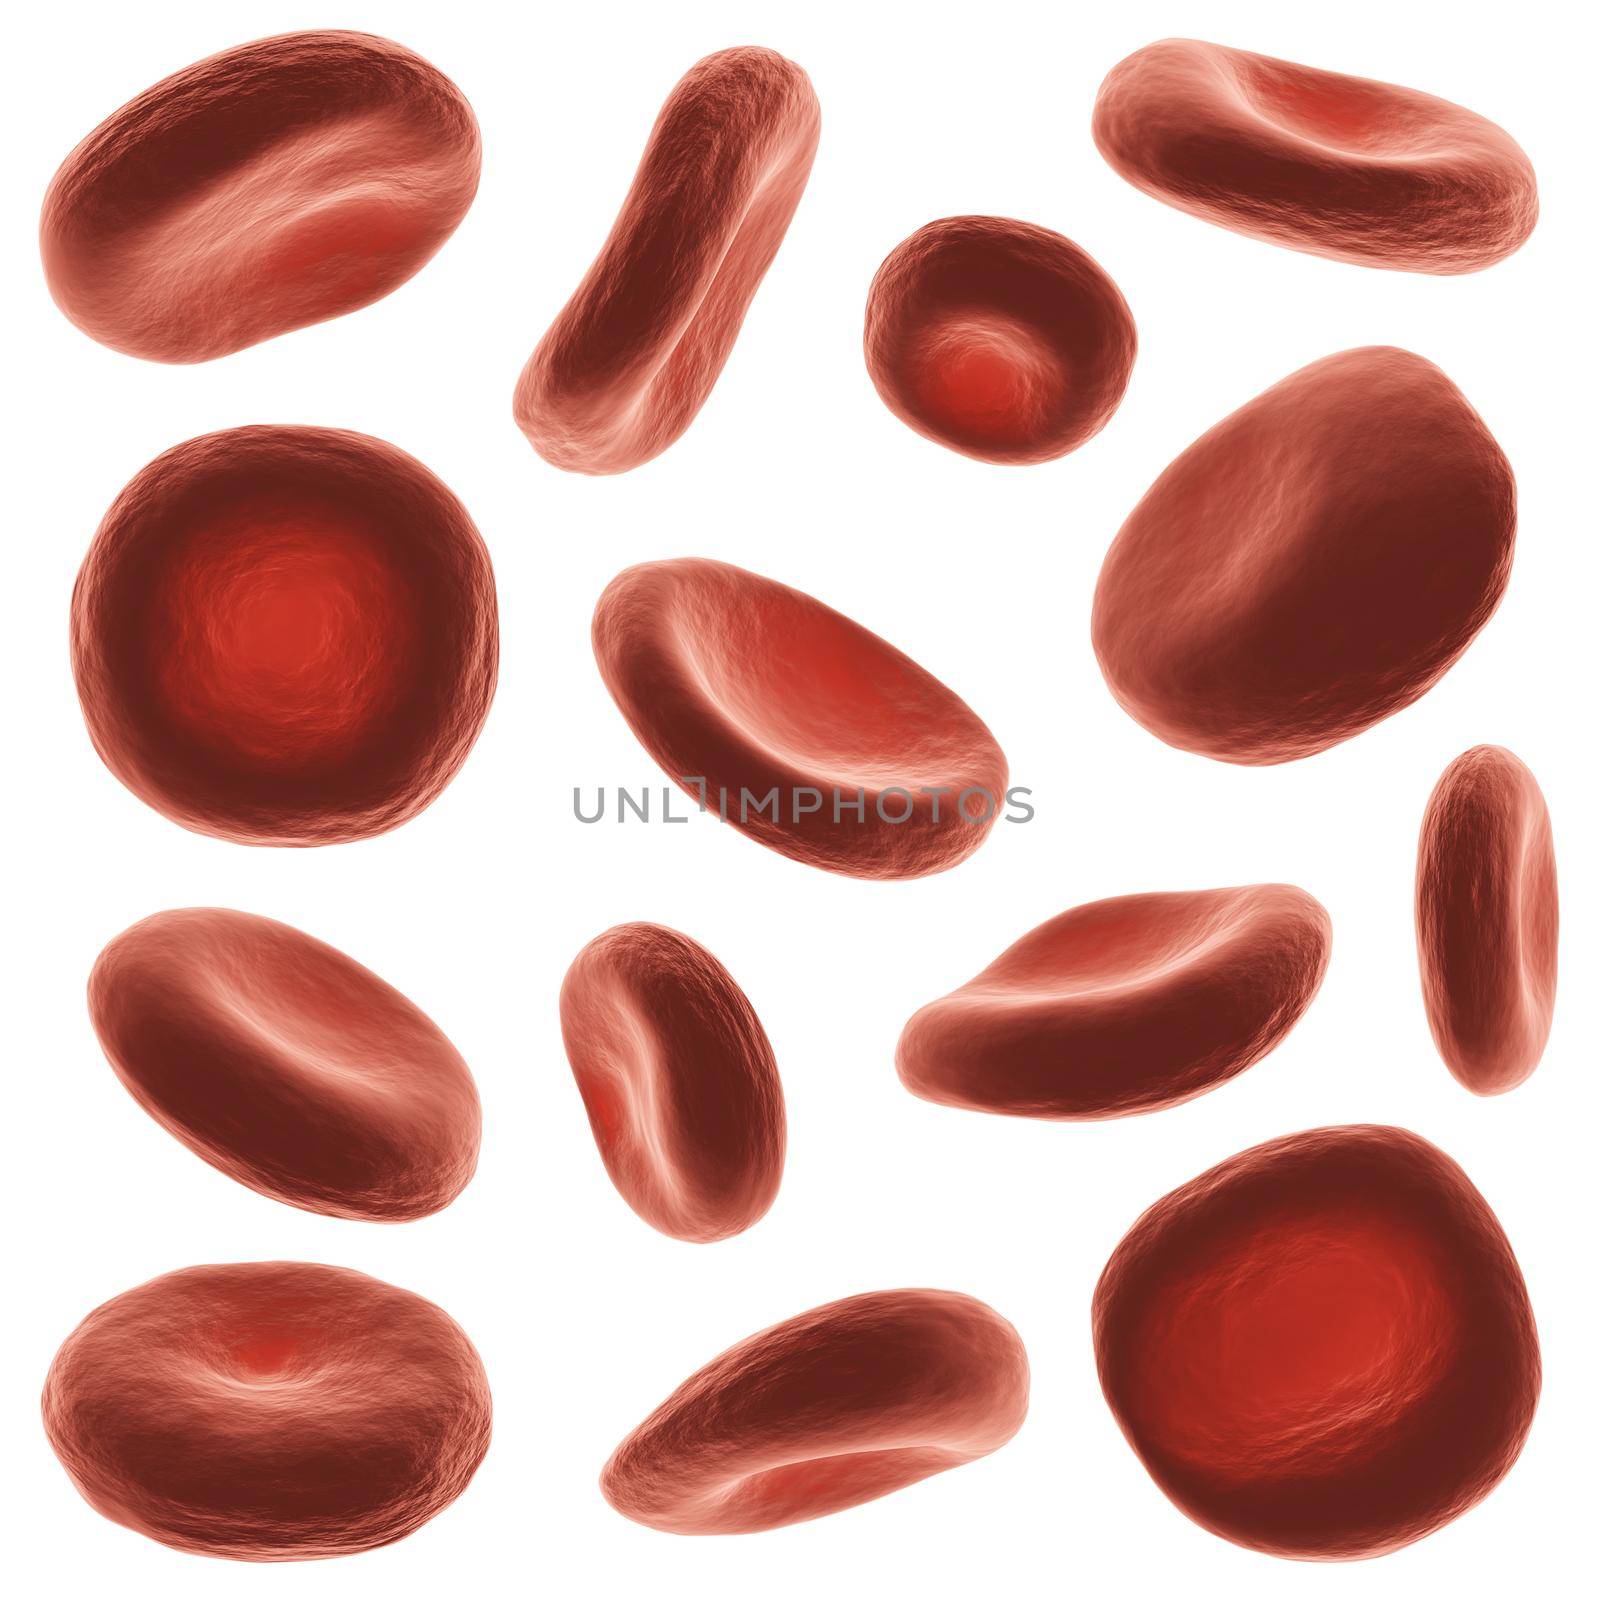 Red blood cells with high detailed surface . Set of different view and shape . White isolated background . 3D rendering .